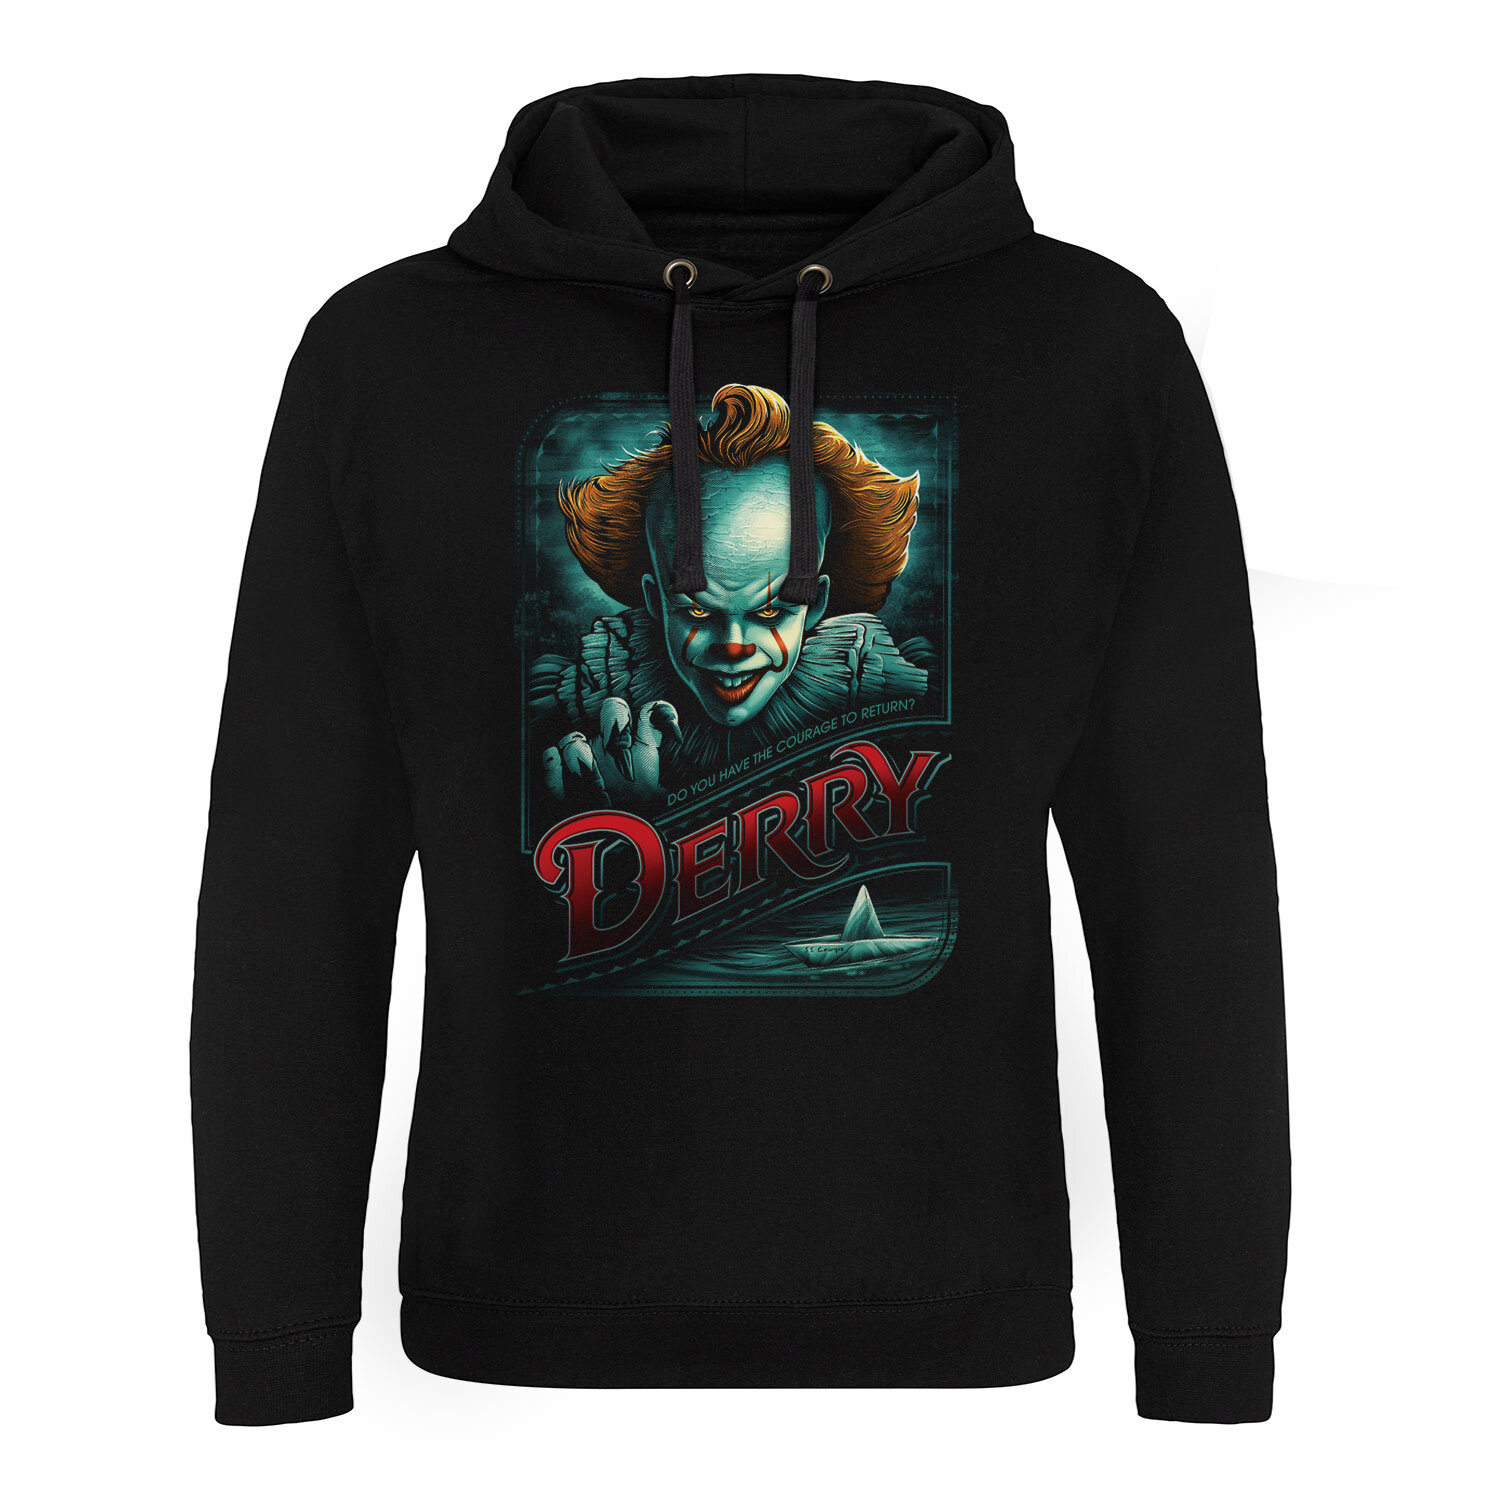 IT - Pennywise in Derry Epic Hoodie